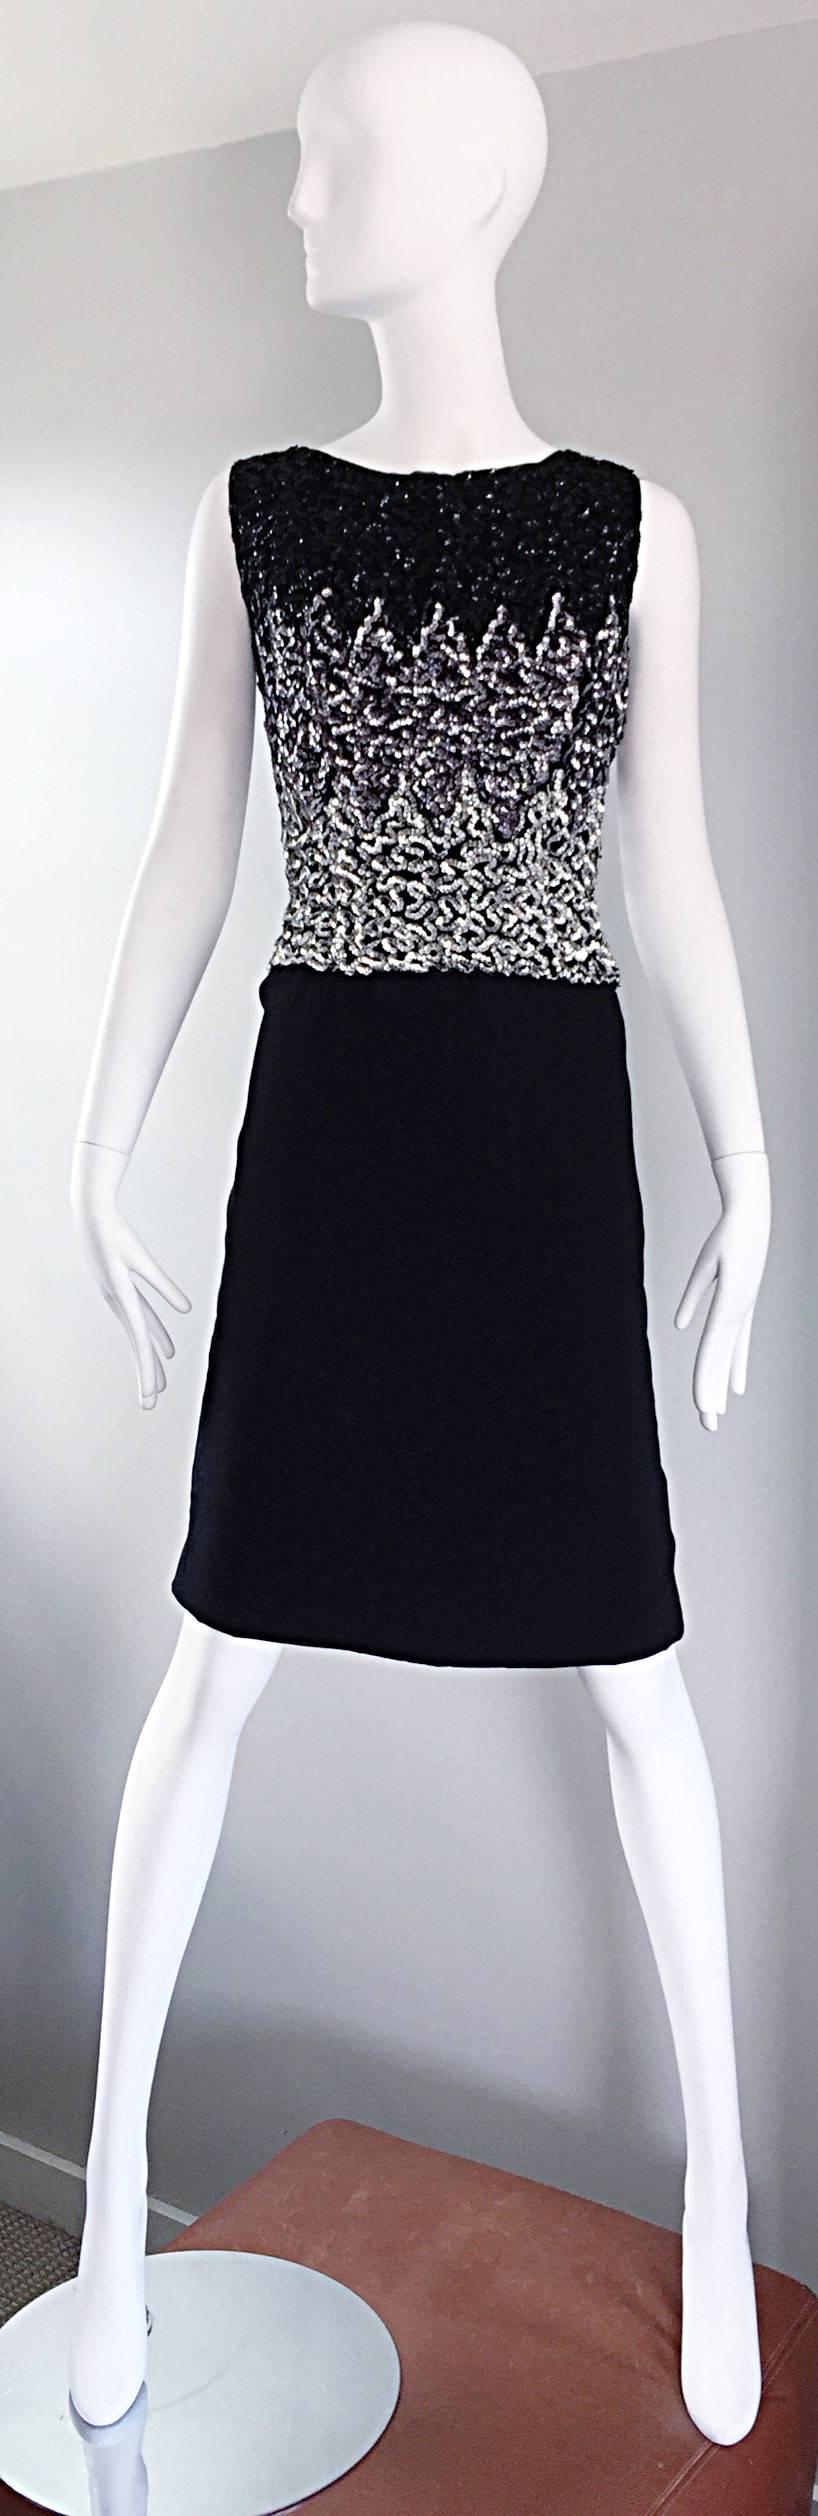 Sensational late 1950s black, silver and gunmetal sequined wiggle shift dress! Features allover hand-sewn sequins throughout the front and back of the bodice. Peek-a-boo at the top back with button closure. Great fit, and easy to wear. A timeless